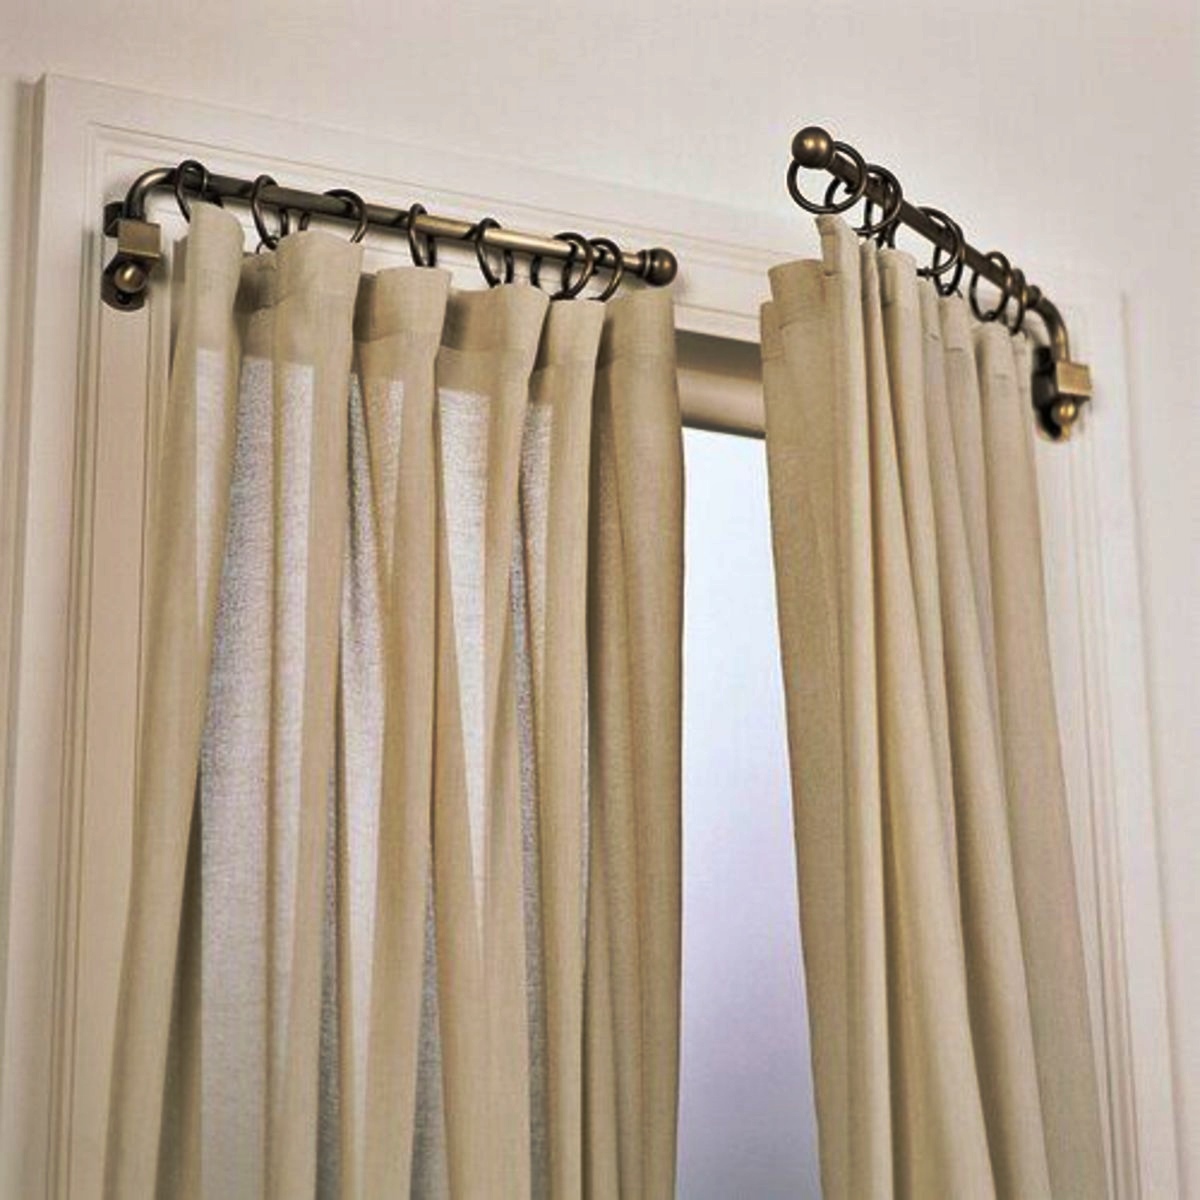 What Is Curtain Rod